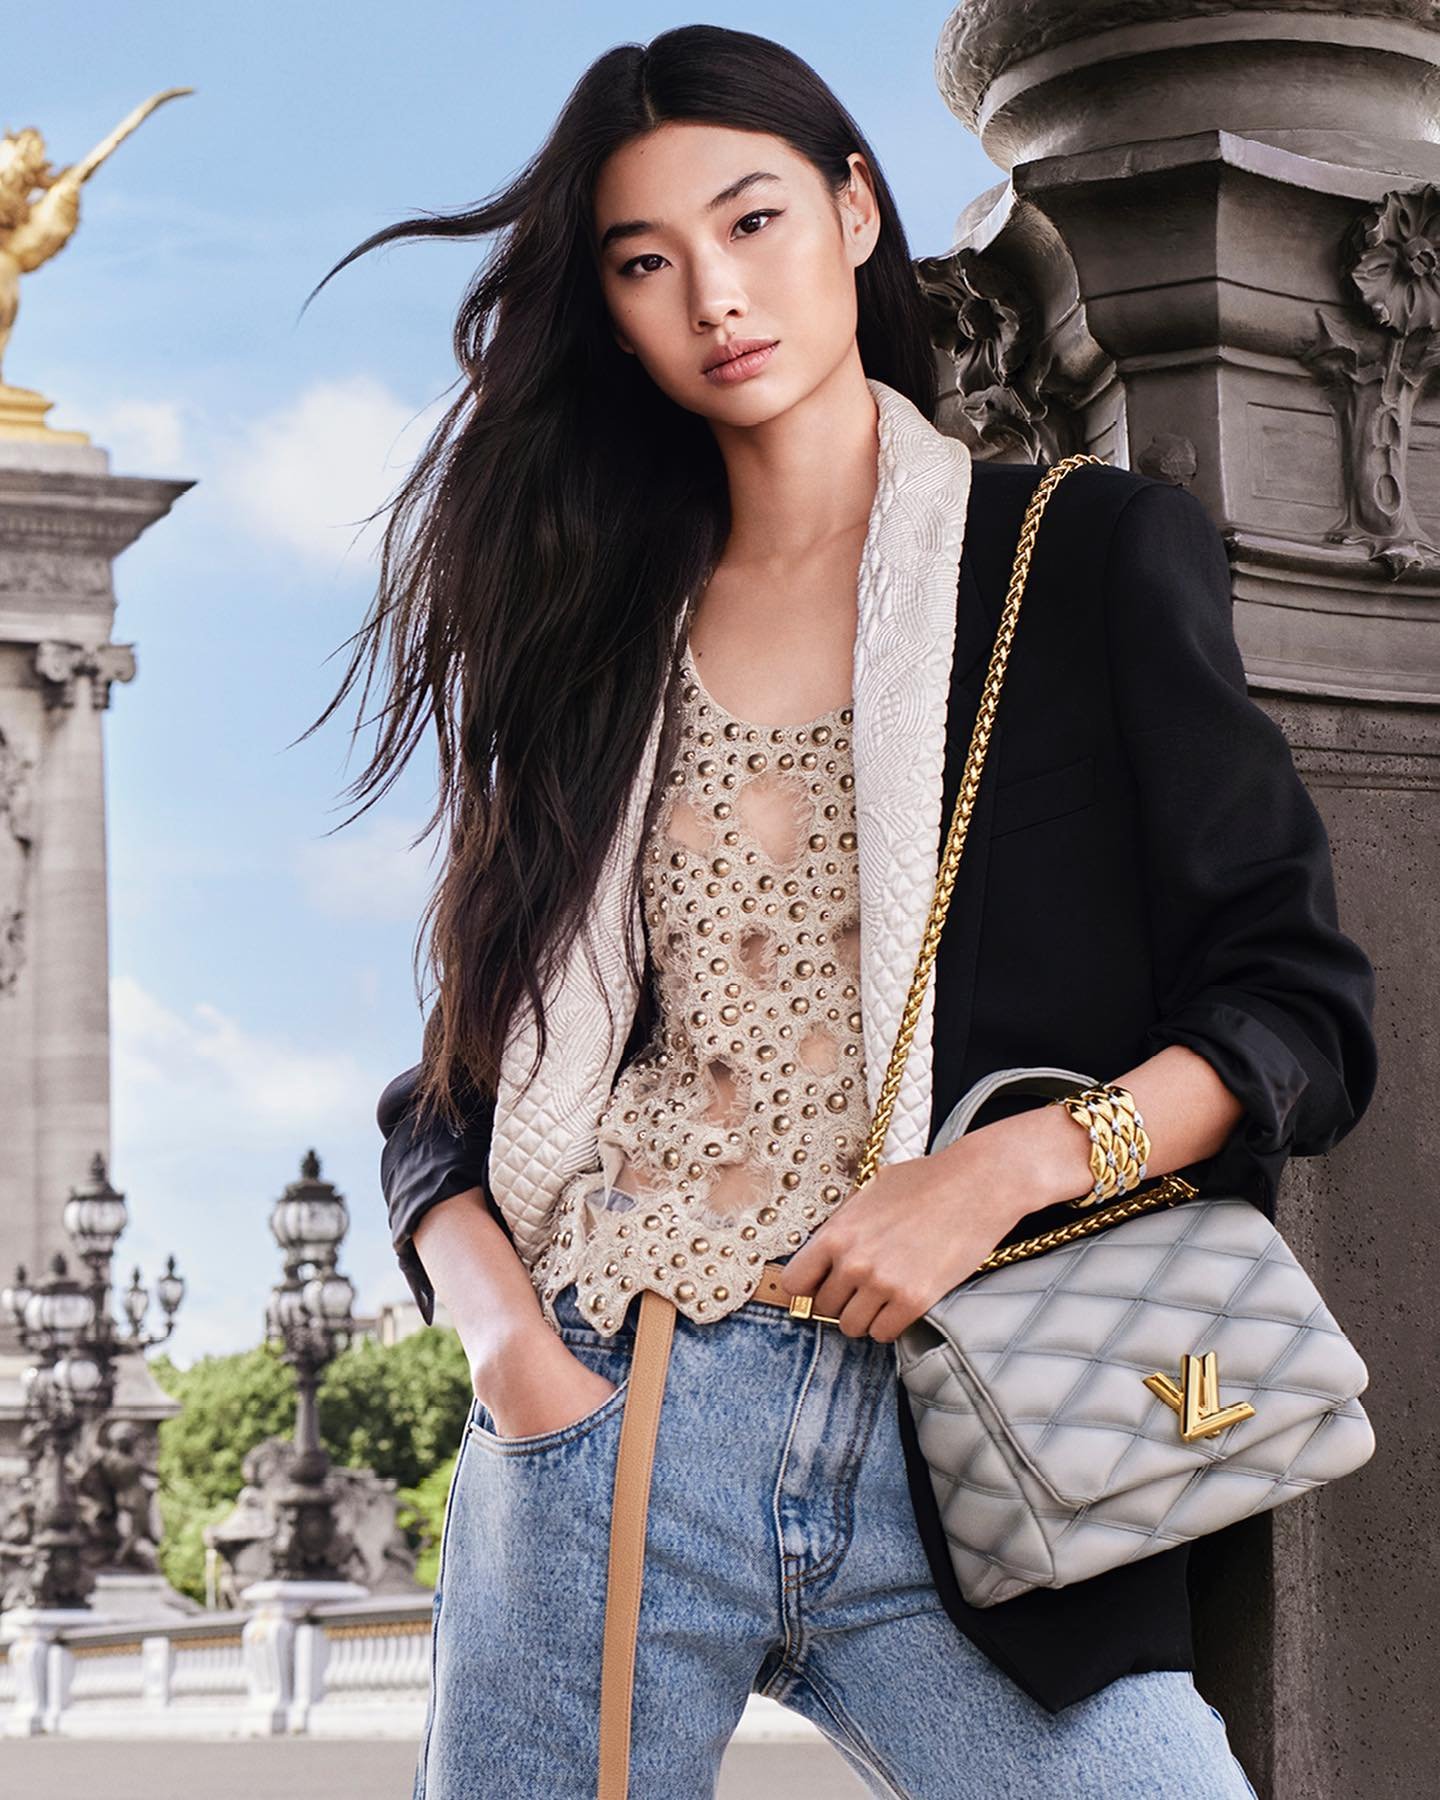 Louis-Vuitton-FW-2023-Campaign-by-Ethan-James-Green-13.jpg